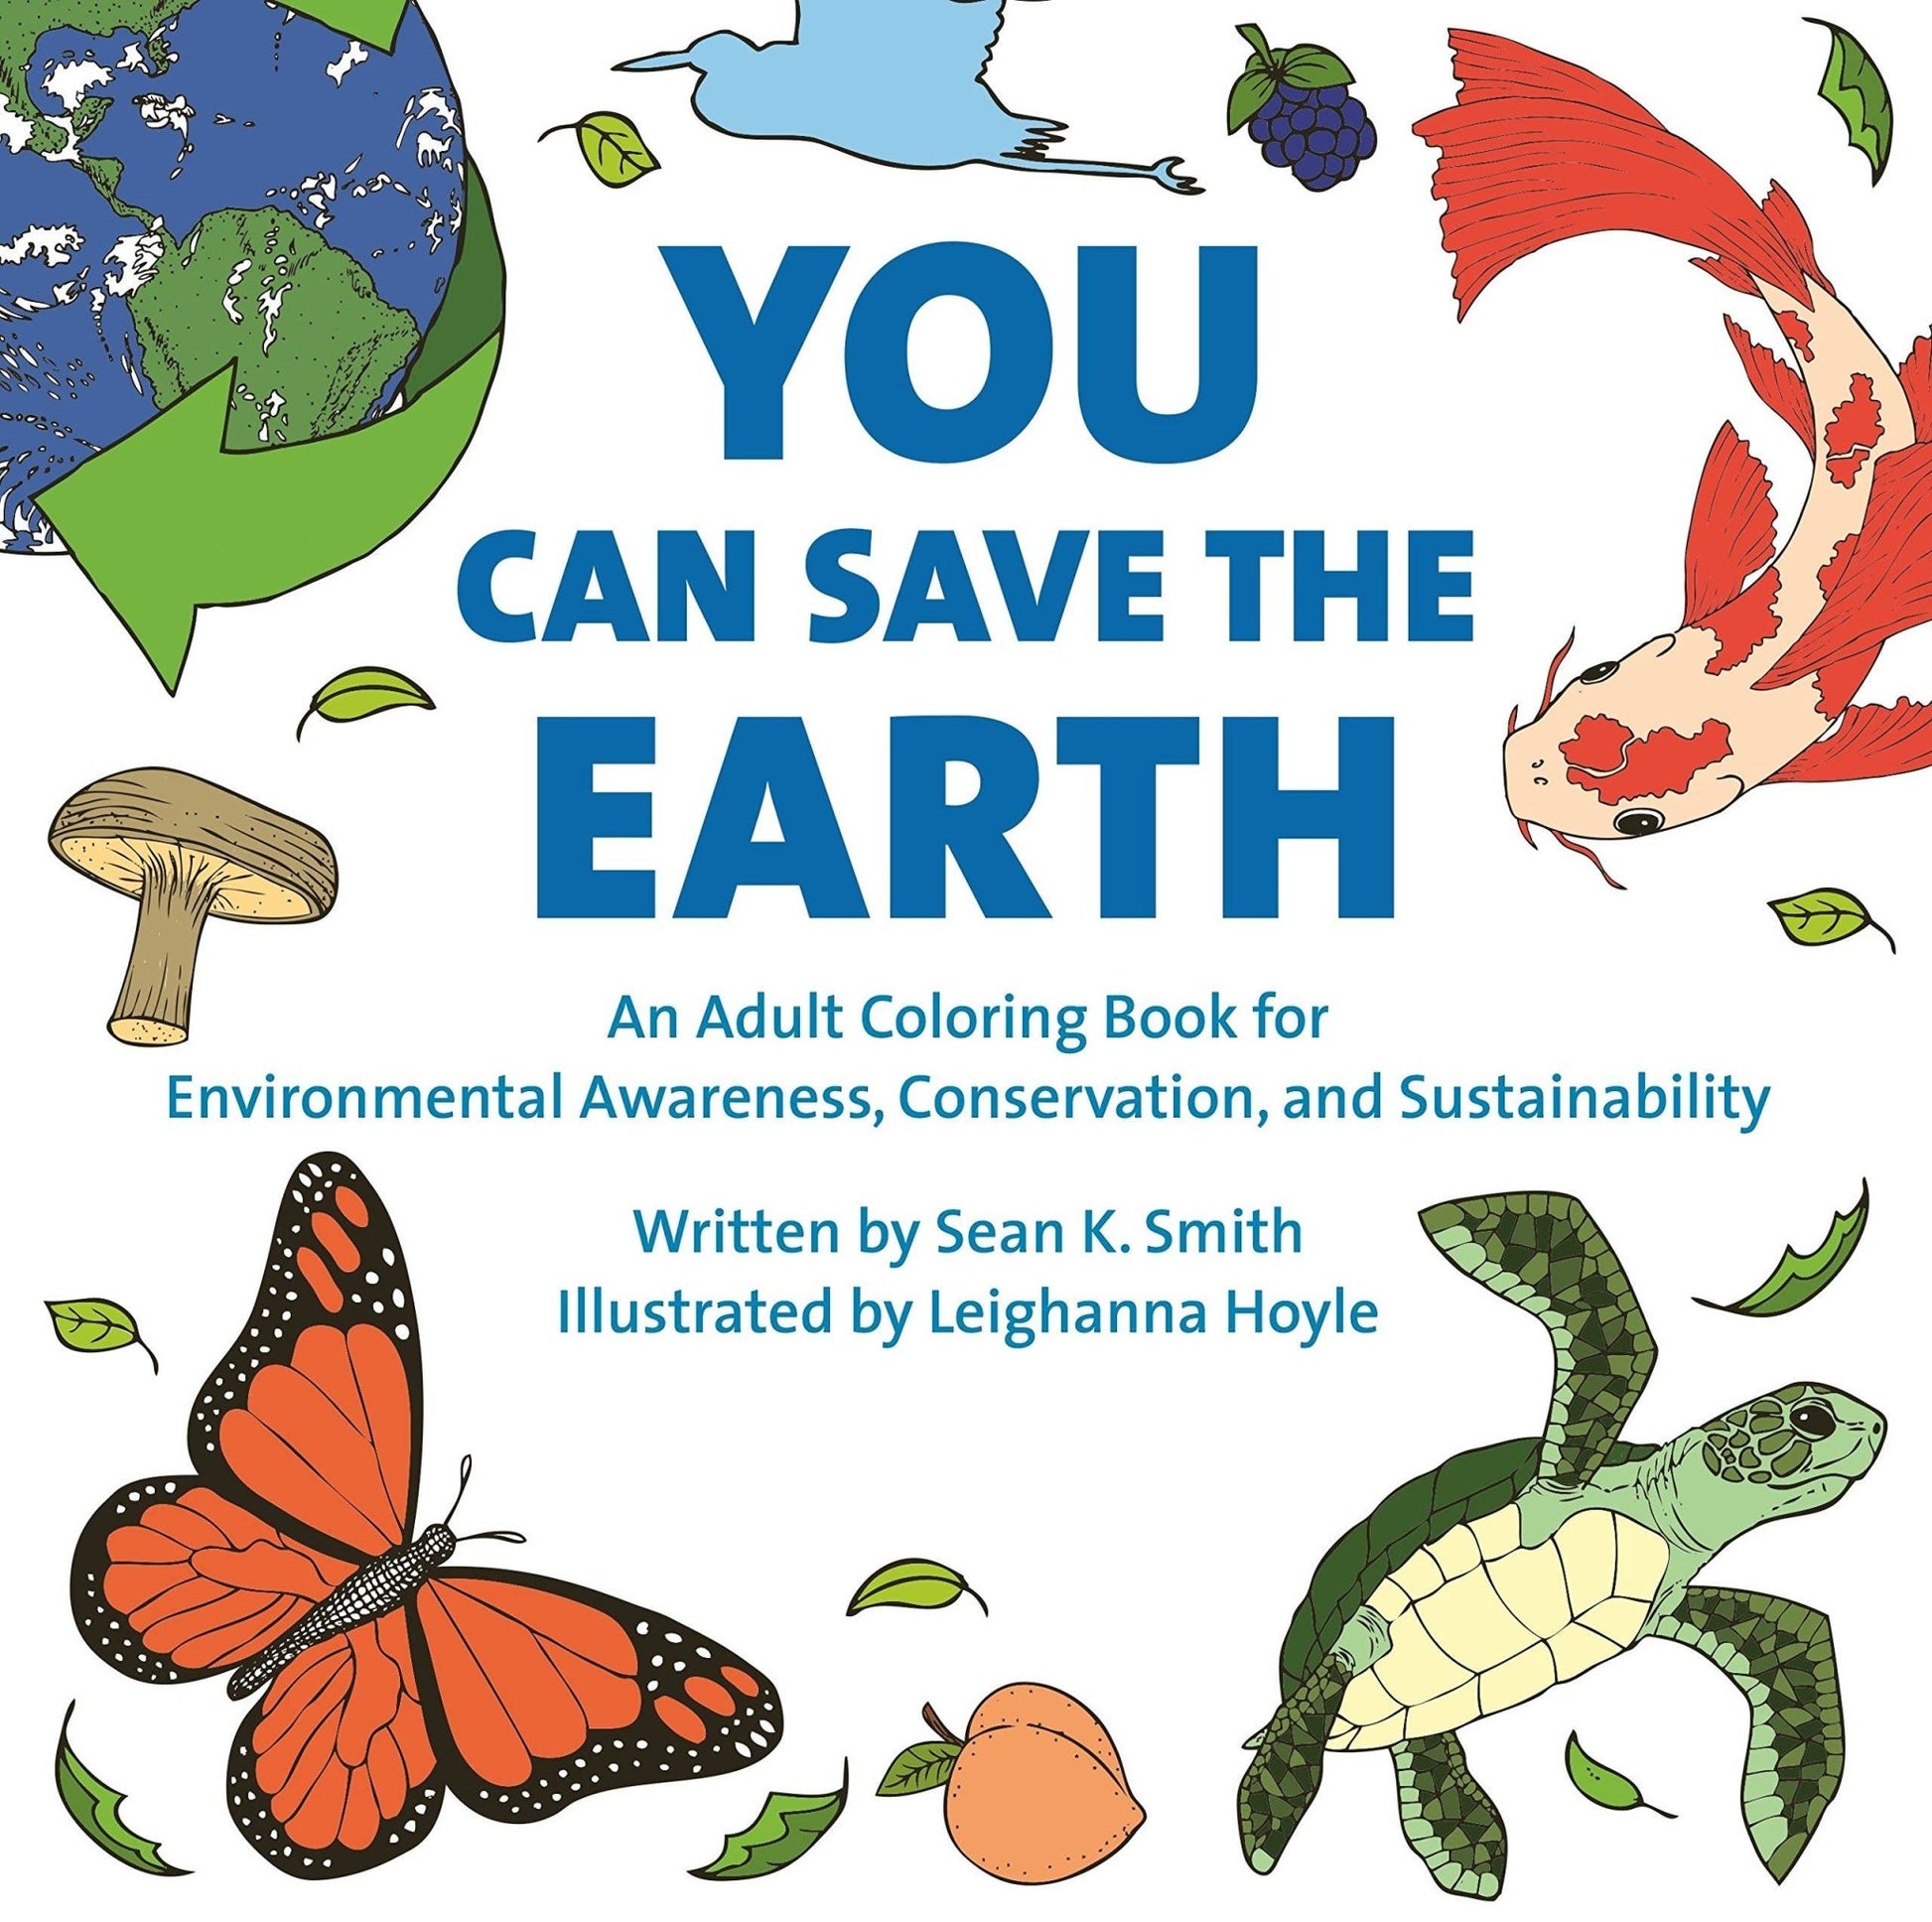 You Can Save the Earth Adult Coloring Book - oh-eco